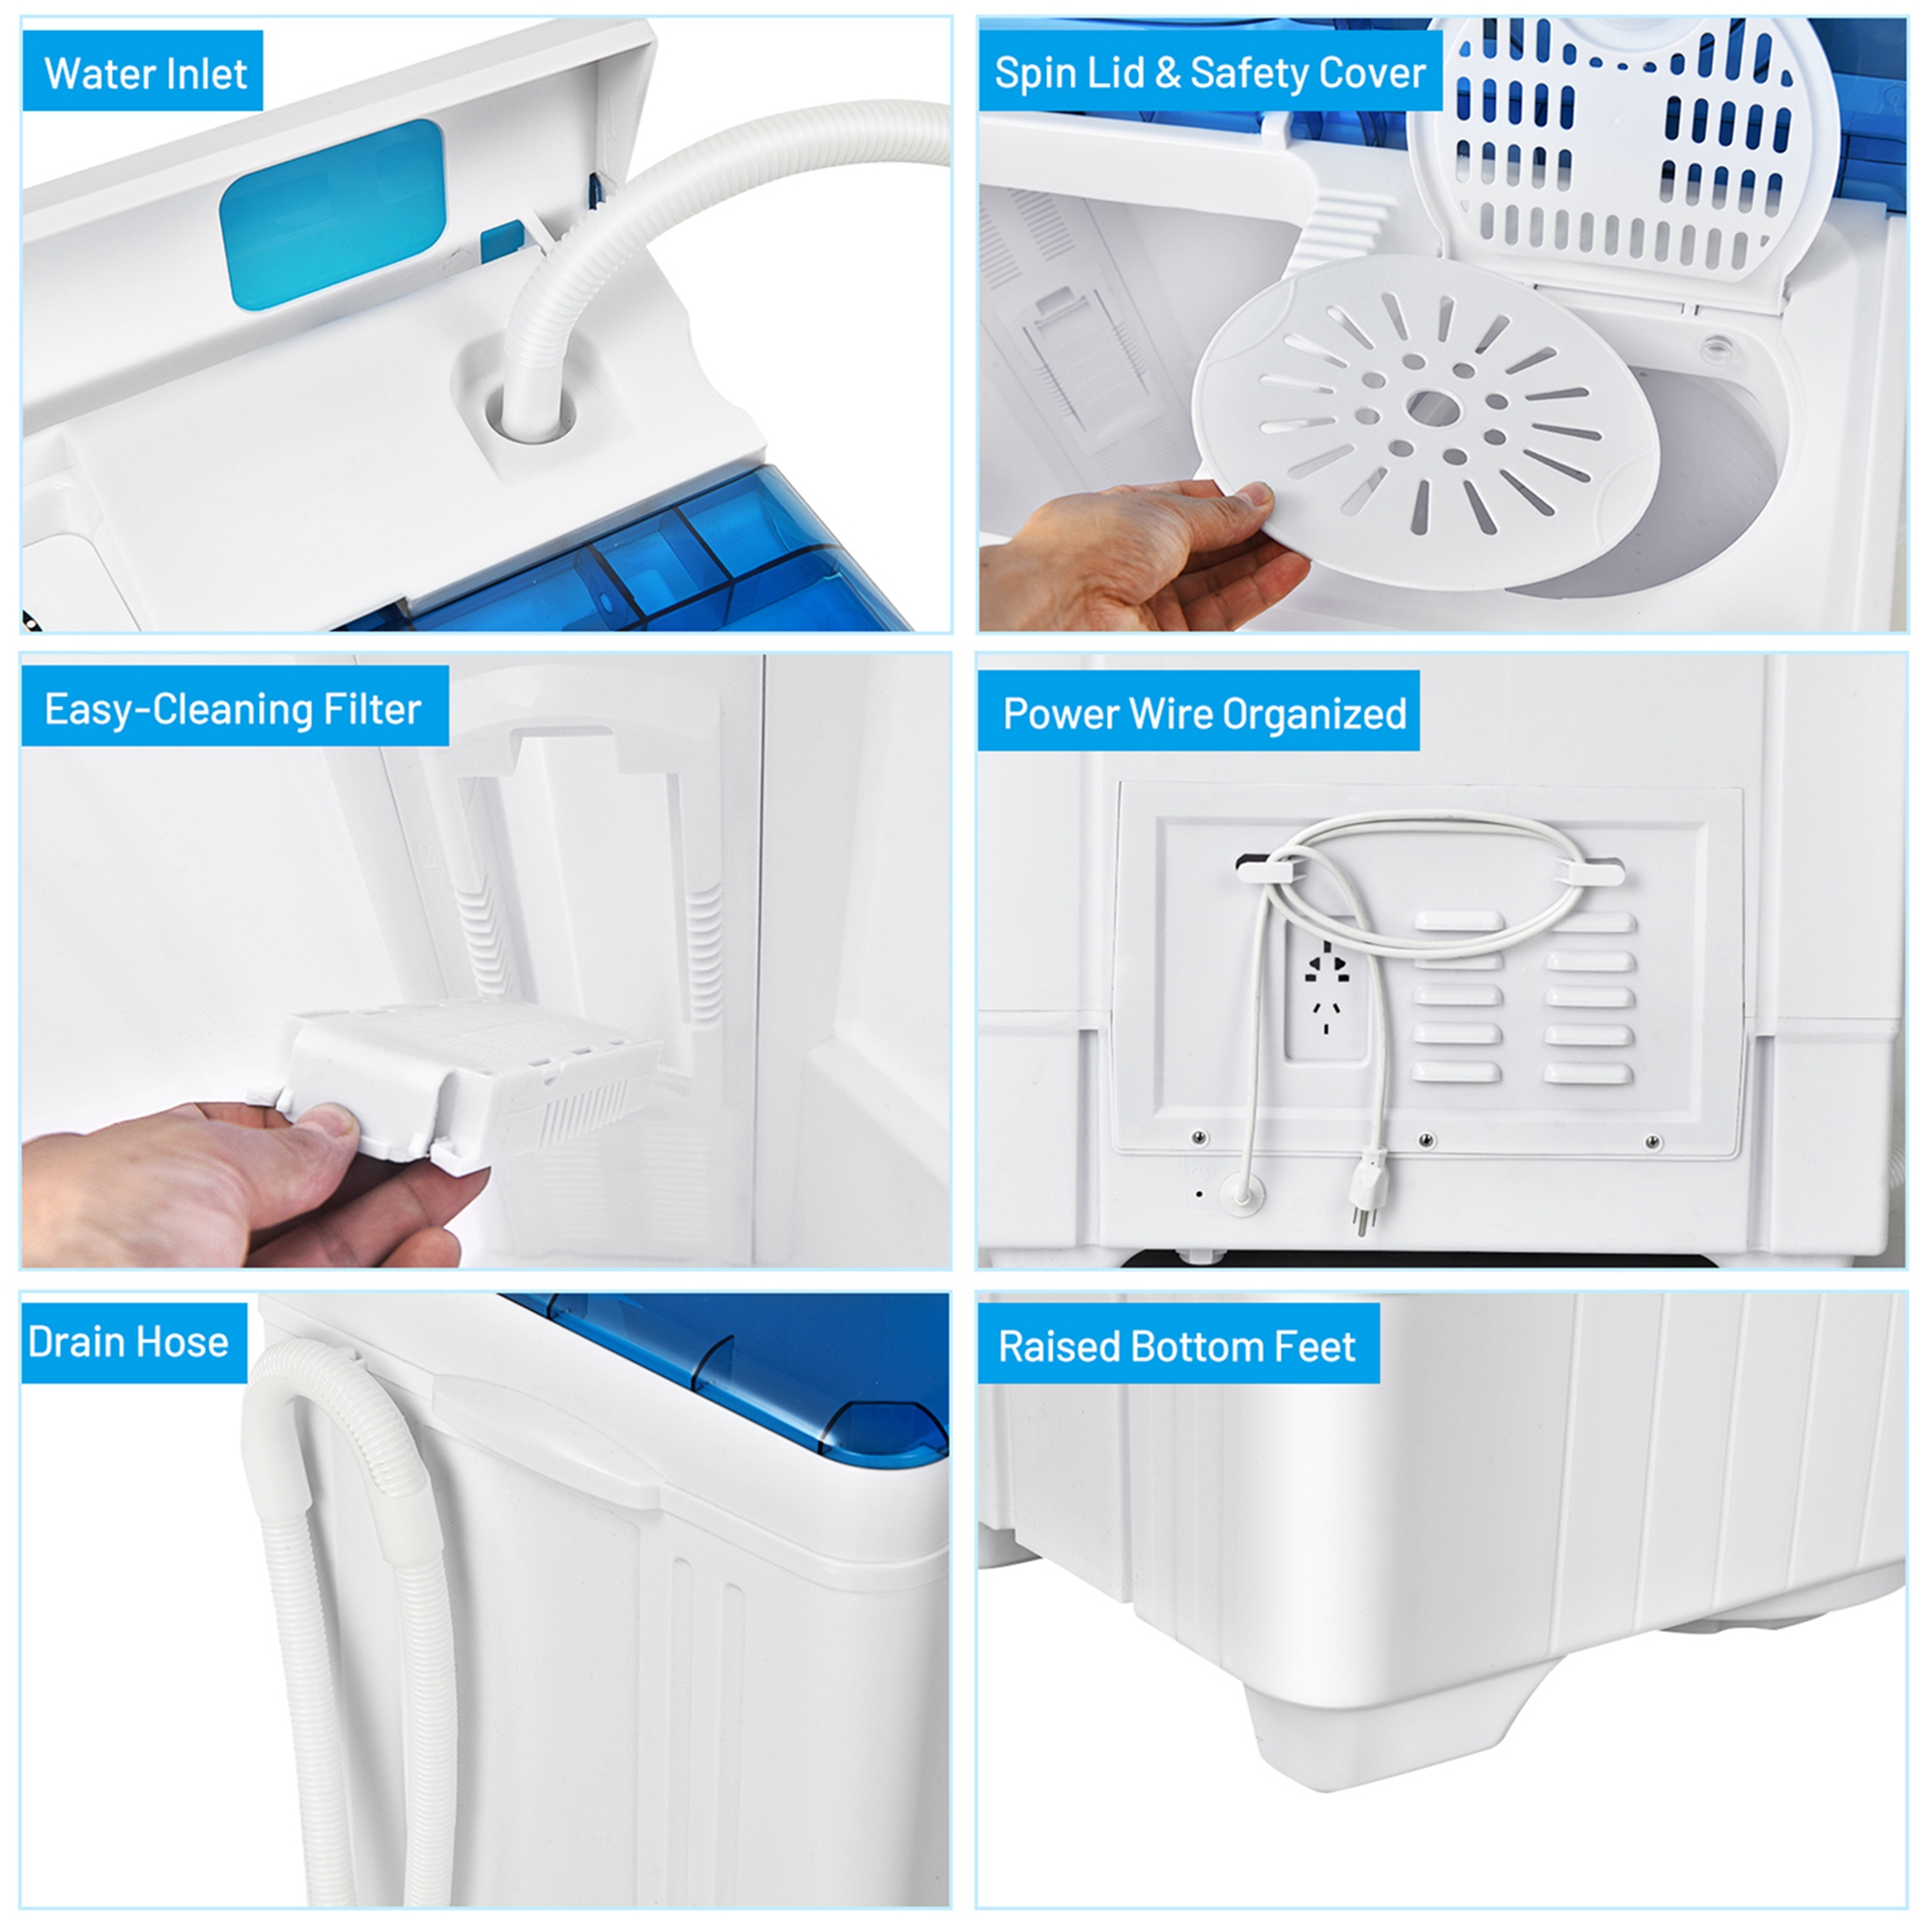 Costway 26lbs Portable Semi-automatic Washing Machine W/Built-in Drain Pump Blue - image 4 of 10